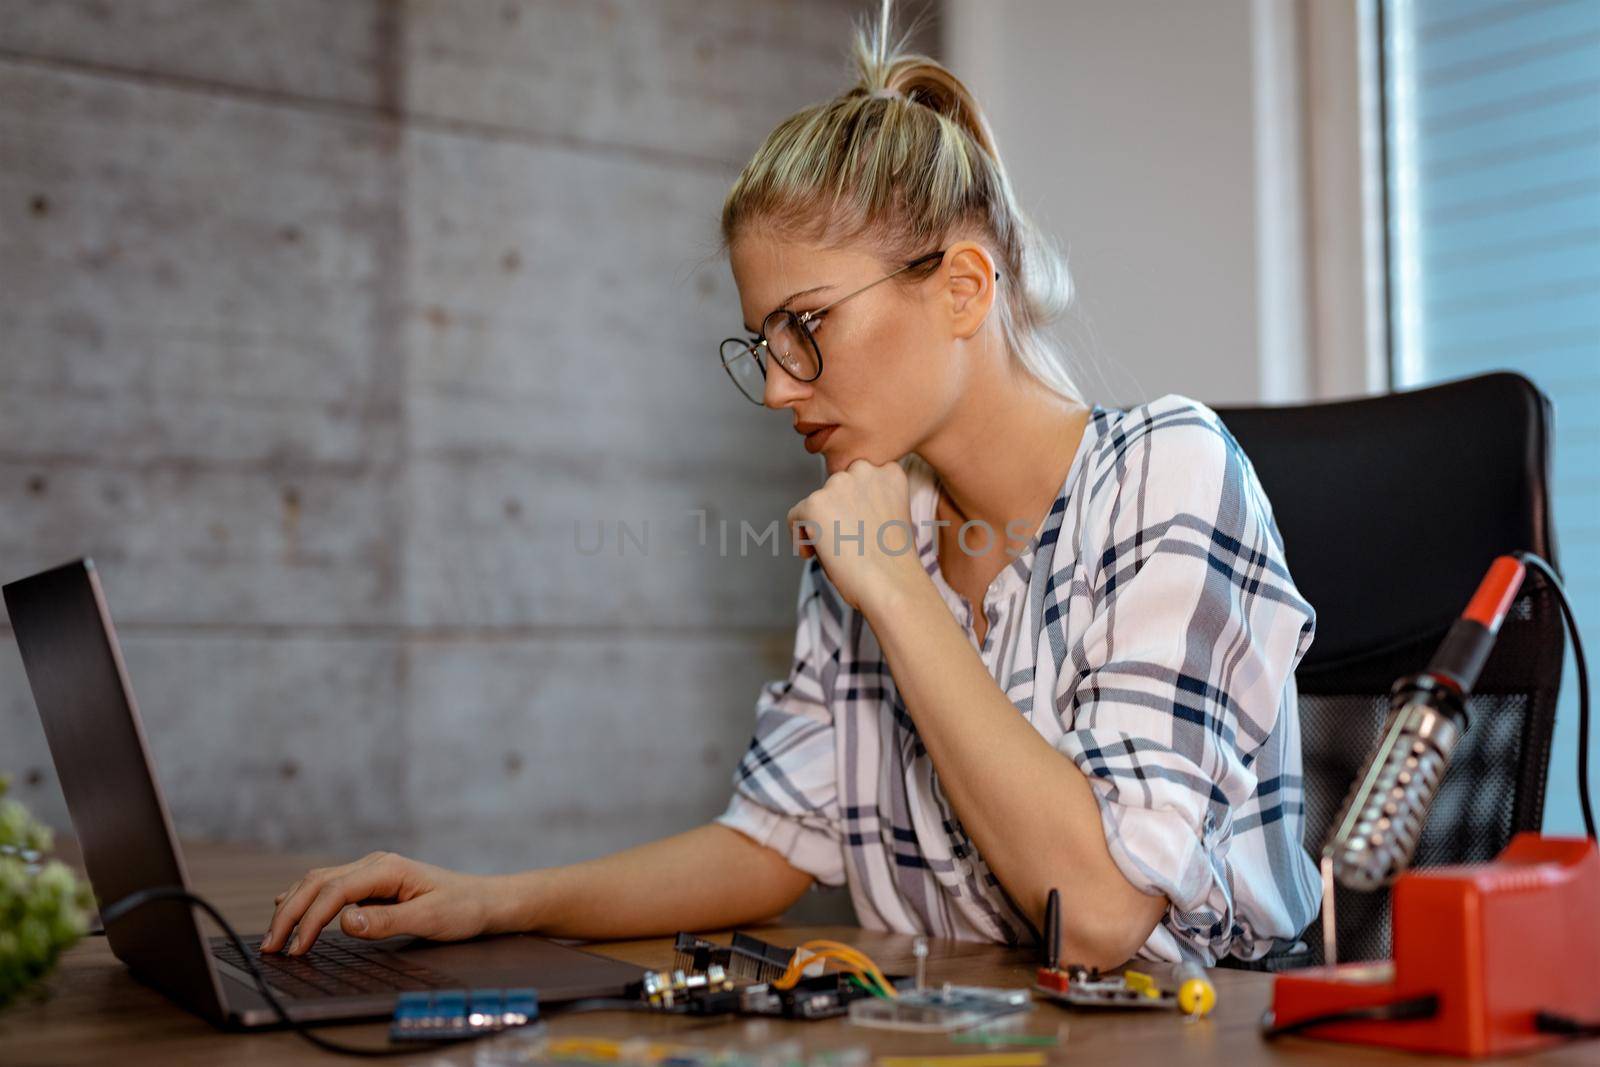 Young woman technician focused on the repair of electronic equipment cecking something on the laptop.